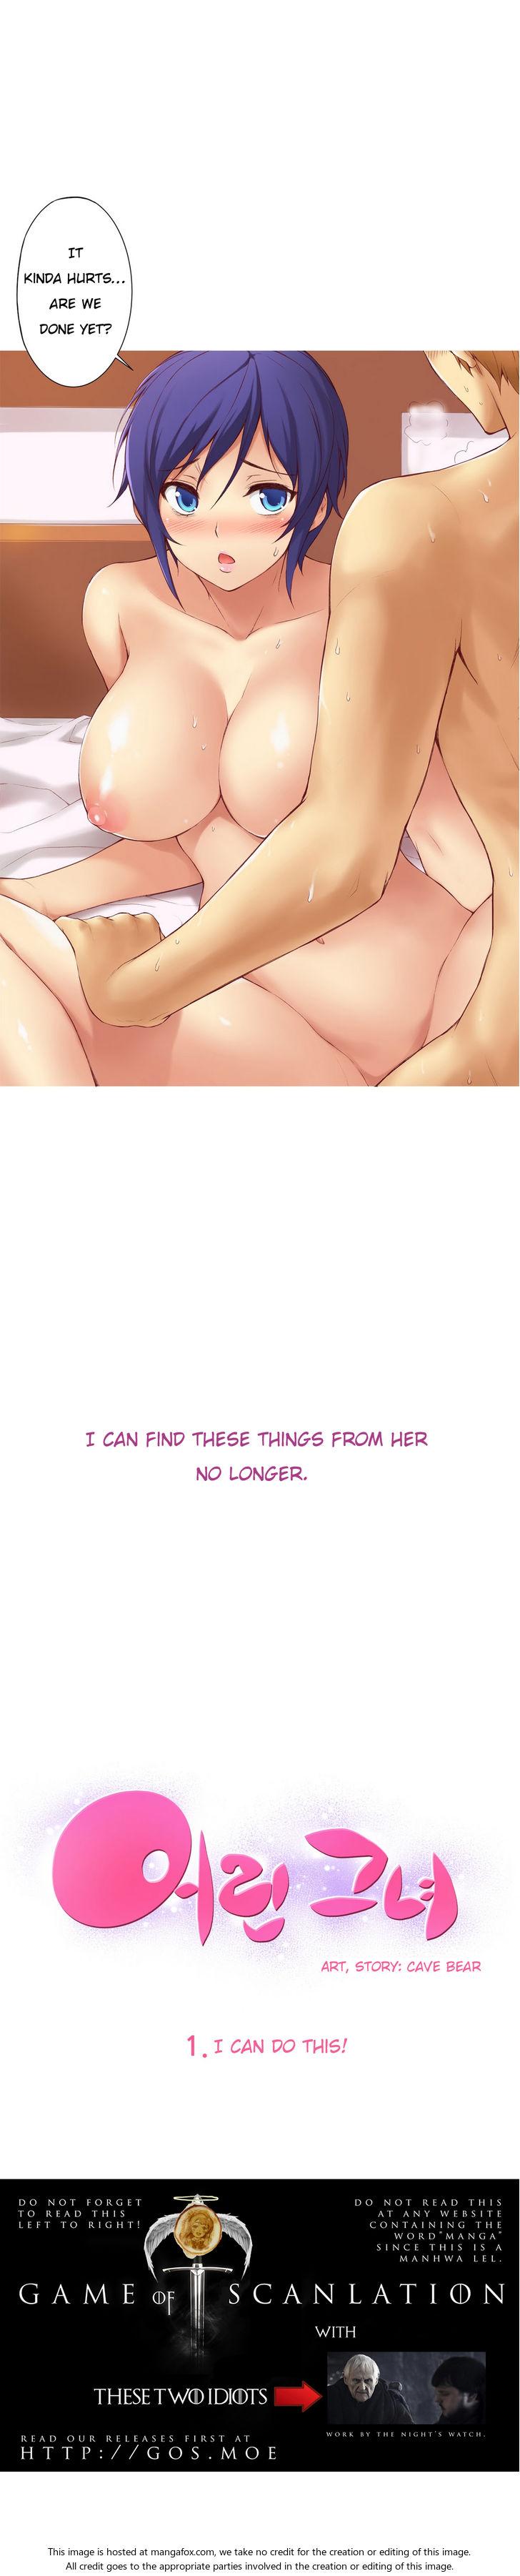 Wet Cunt [Donggul Gom] She is Young (English) Part 1/2 Nice Tits - Page 6